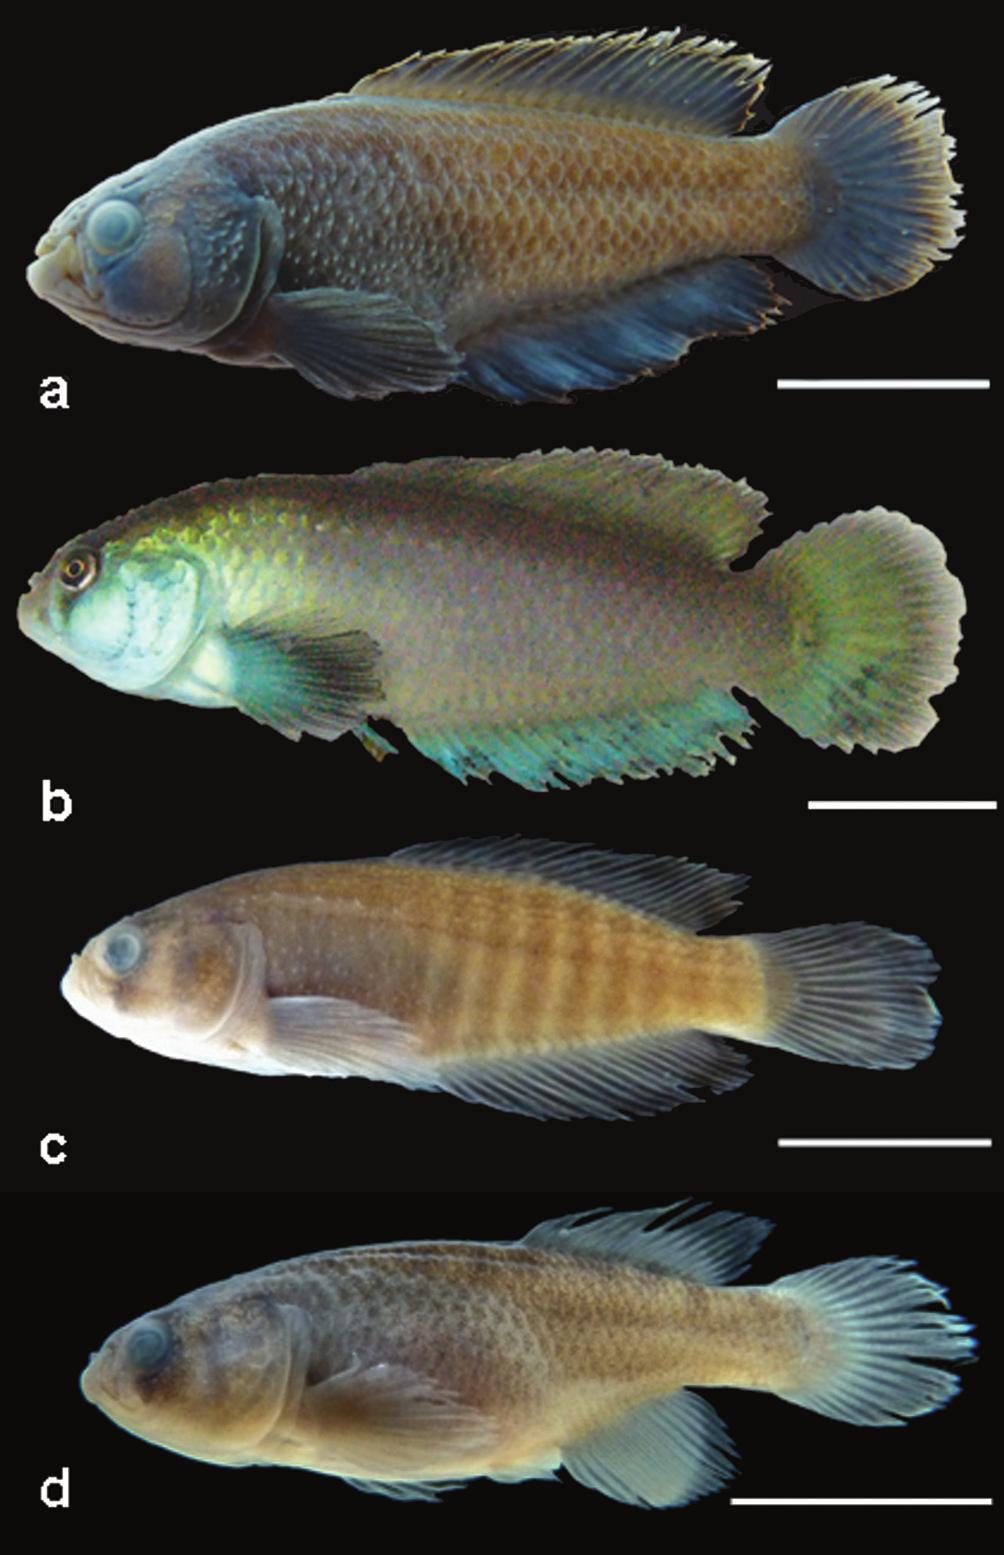 336 A new species of Austrolebias from northeastern Uruguay shaped the current distribution patterns. Despite some exceptions (García et al.